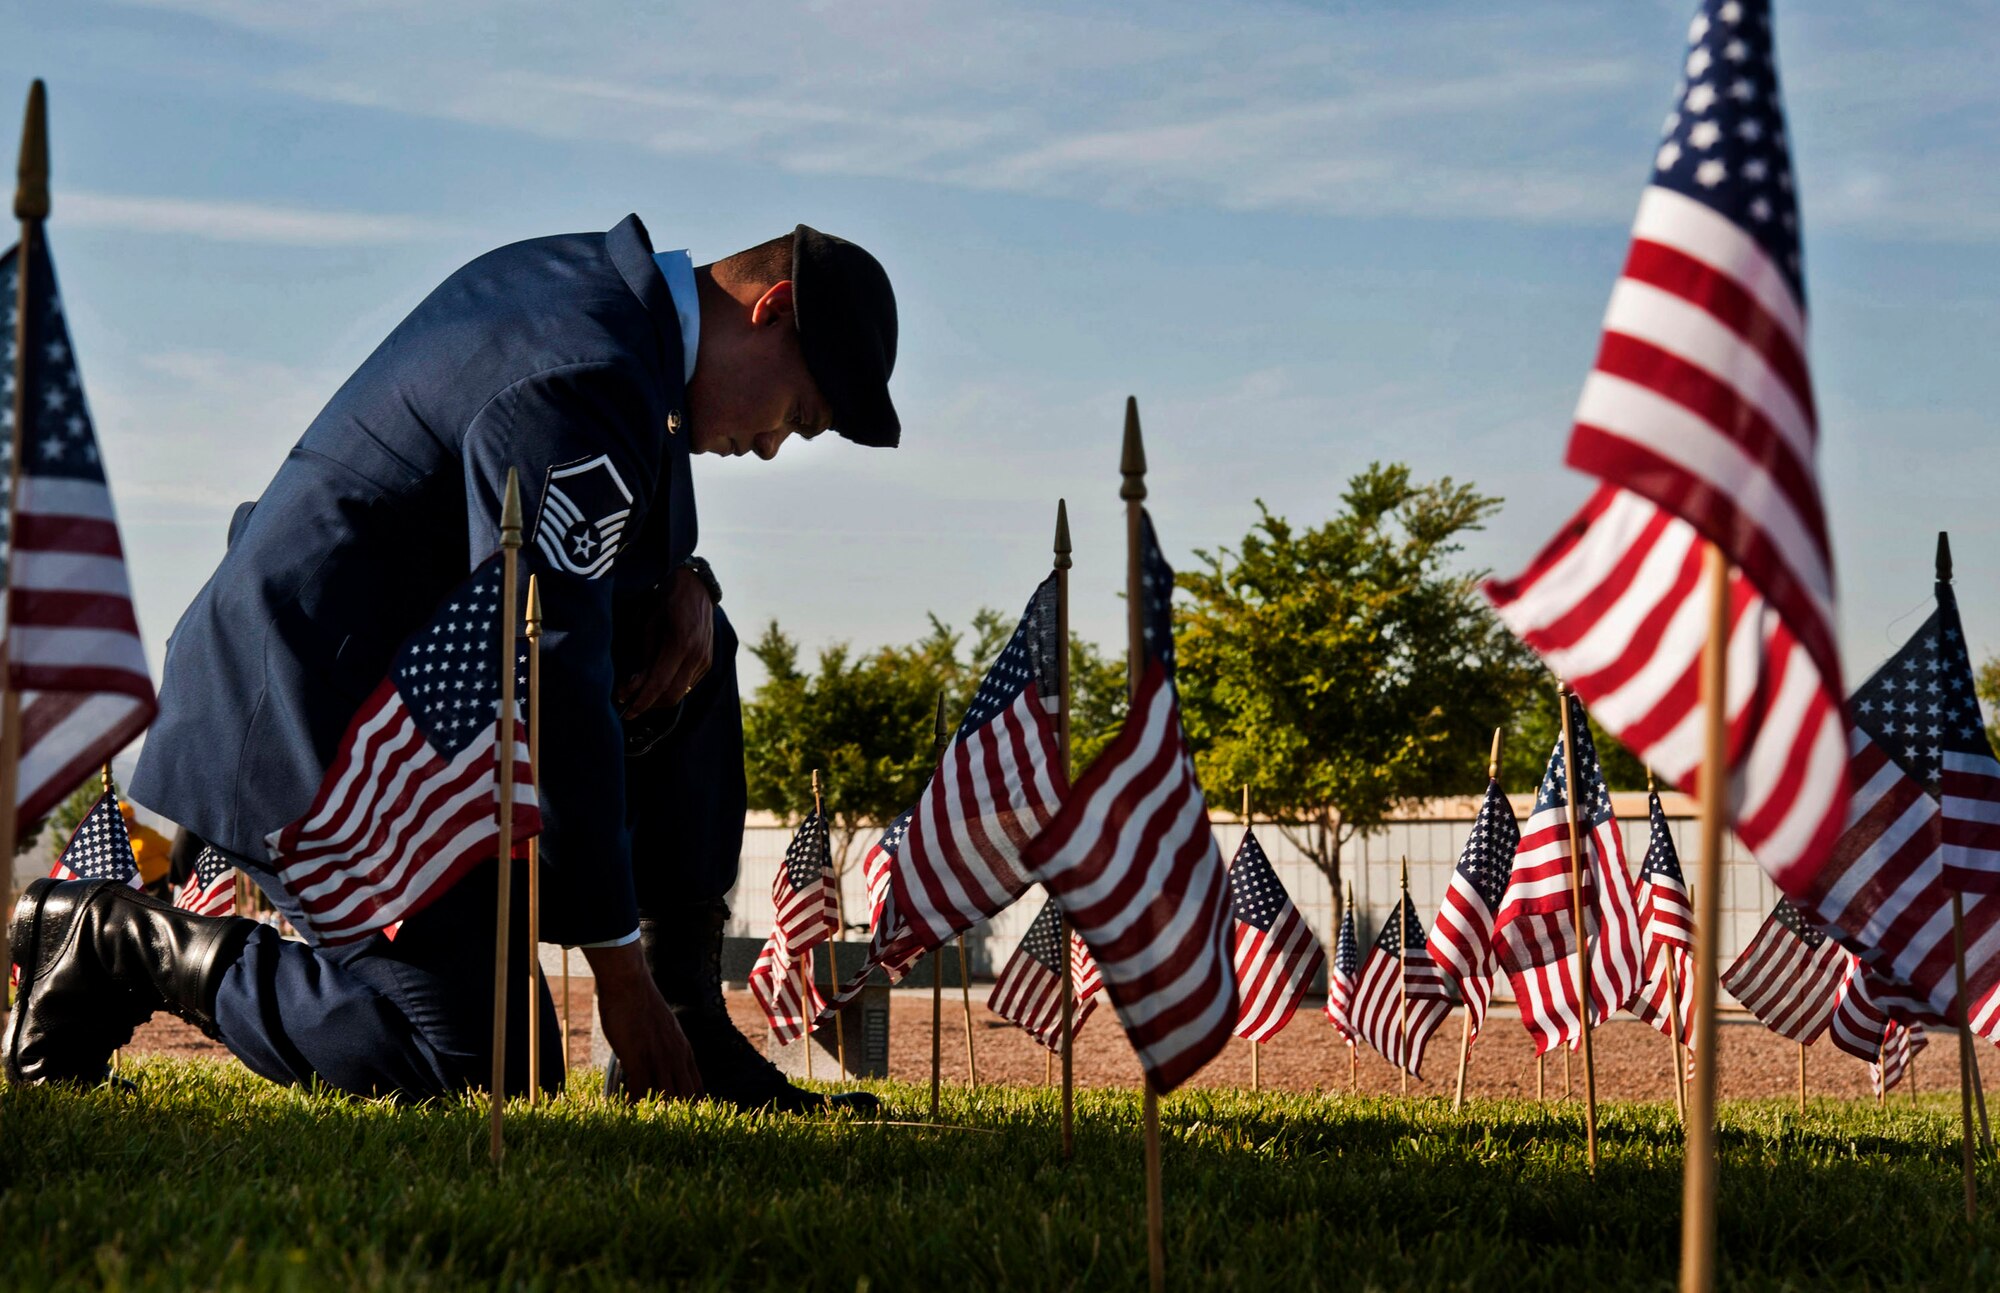 U.S. Air Force Master Sgt. Robert Lilly, 57th Operations Group joint tactical air controller, pays his respects to a fallen veteran May 28, 2013, at the Southern Nevada Veterans Memorial Cemetery, Boulder City, Nev. Lilly and other Airmen from Nellis Air Force Base, Nev., volunteered their time to place flags on veterans’ cemetery plots for Memorial Day weekend. (U.S. Air Force photo/Senior Airman Daniel Hughes)